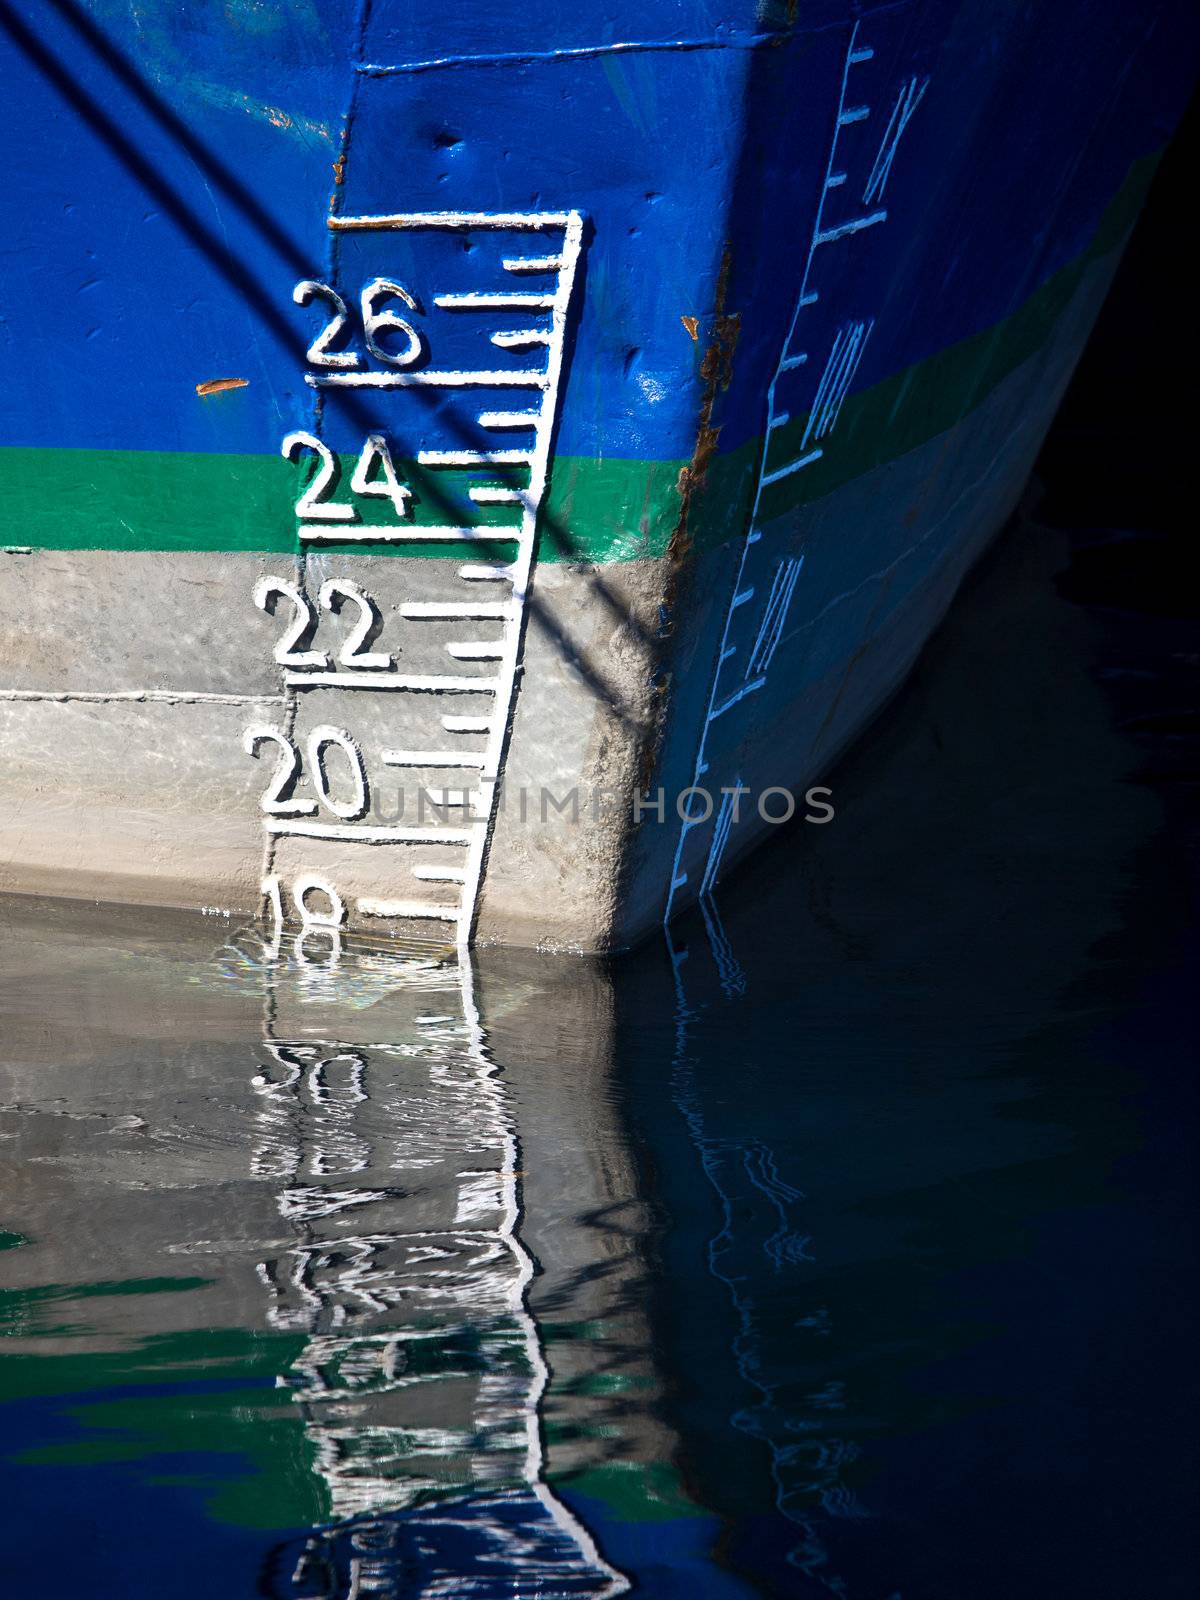 scale on a boat by nevenm